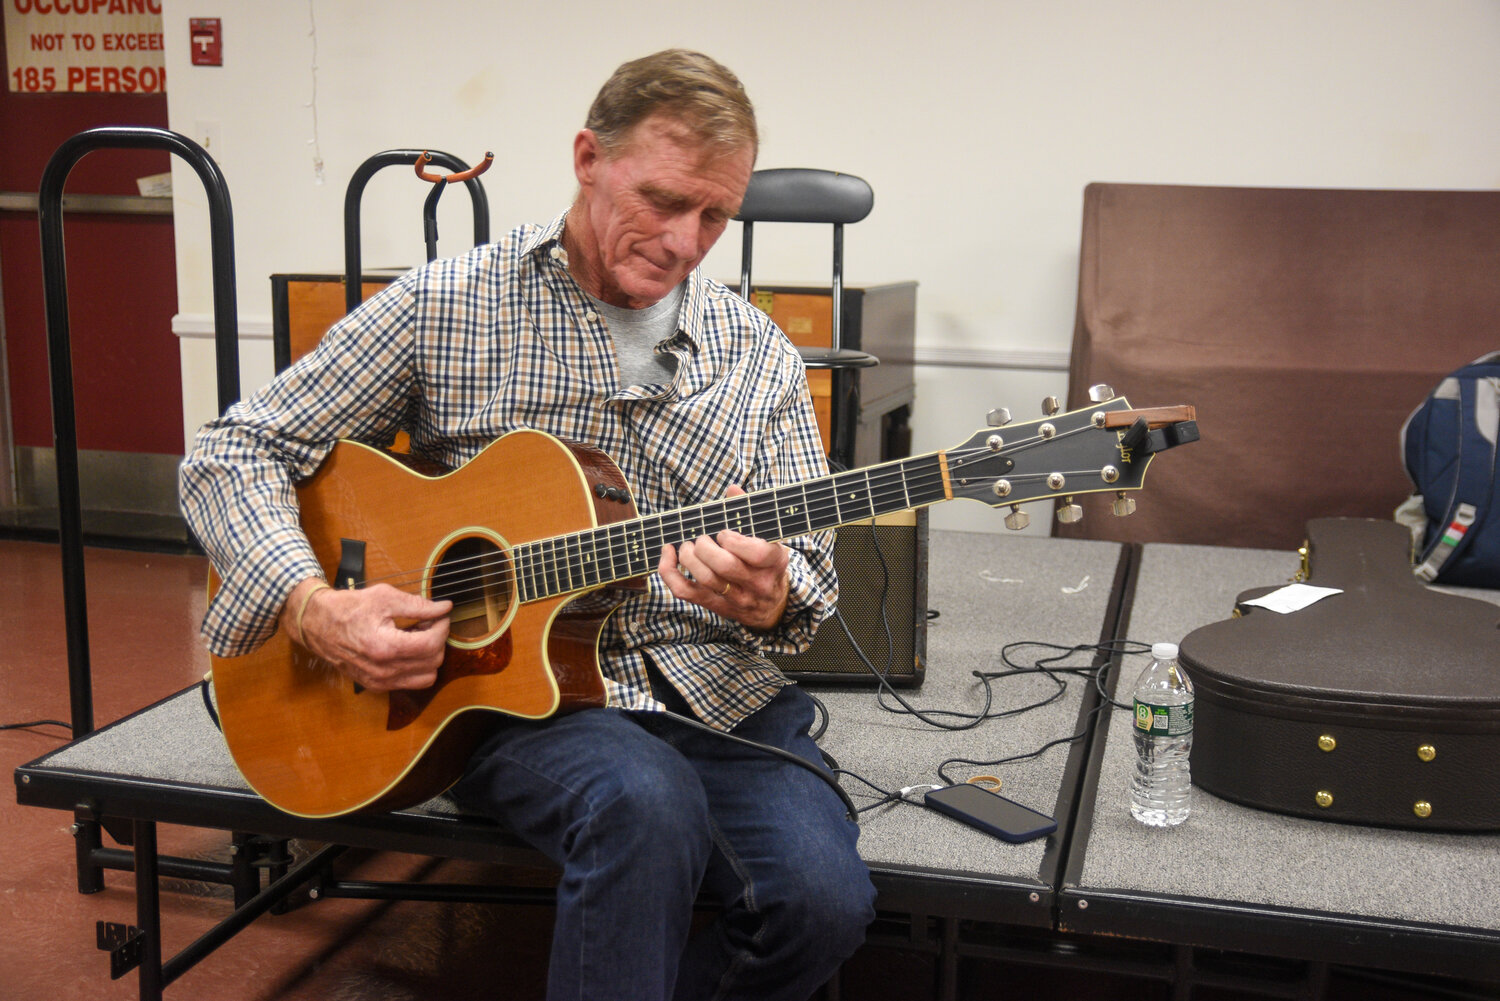 Guitarist Tony Velsmid entertained guests at Zanetto’s artist reception at the Bellmore Memorial Library on Nov. 9.